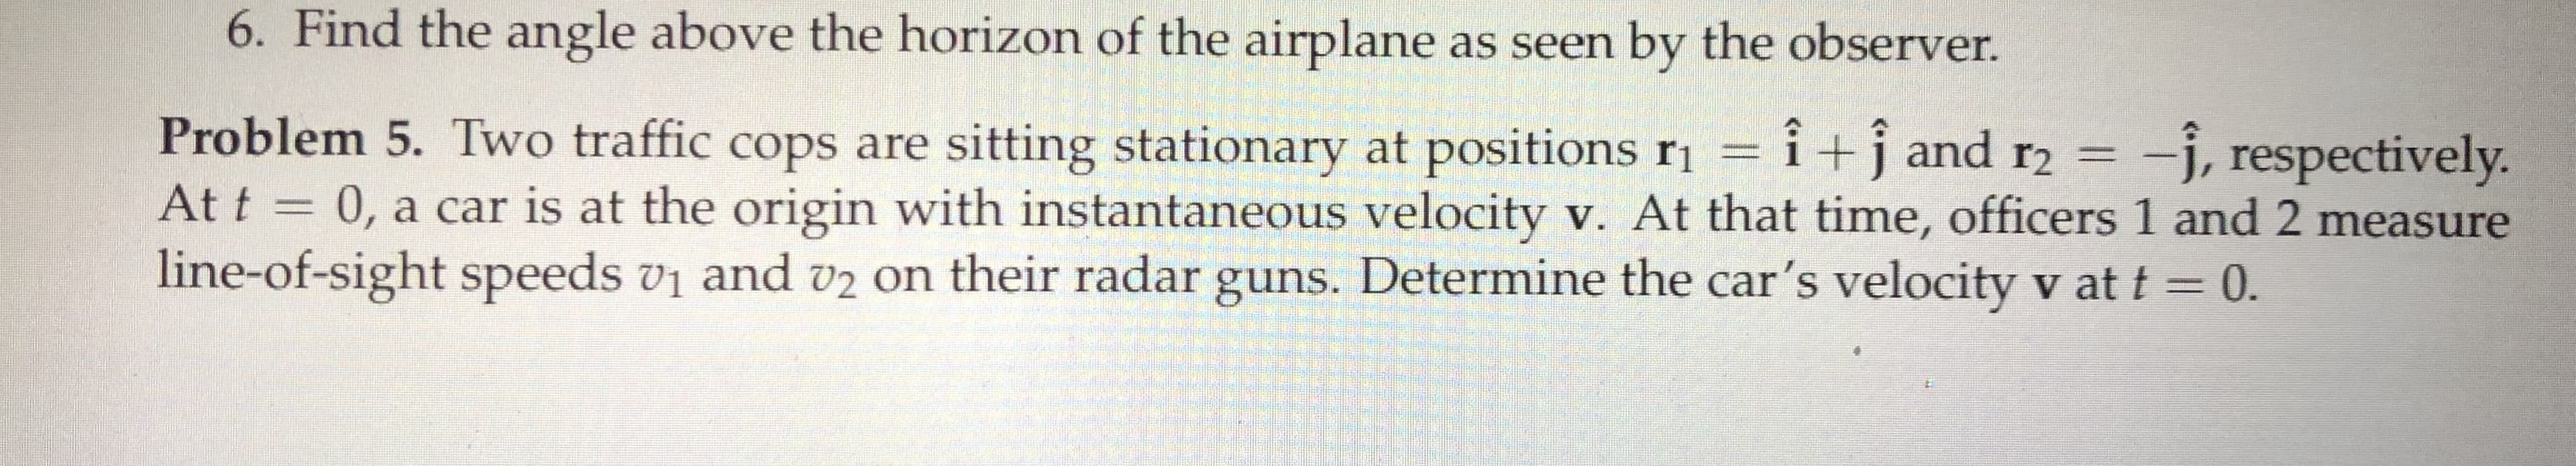 6. Find the angle above the horizon of the airplane as seen by the observer.
Problem 5. Two traffic cops are sitting stationary at positions ri =
At t = 0, a car is at the origin with instantaneous velocity v. At that time, officers 1 and 2 measure
line-of-sight speeds vi and v2 on their radar guns. Determine the car's velocity v at t = 0.
î+j and r2 =
-j, respectively.
